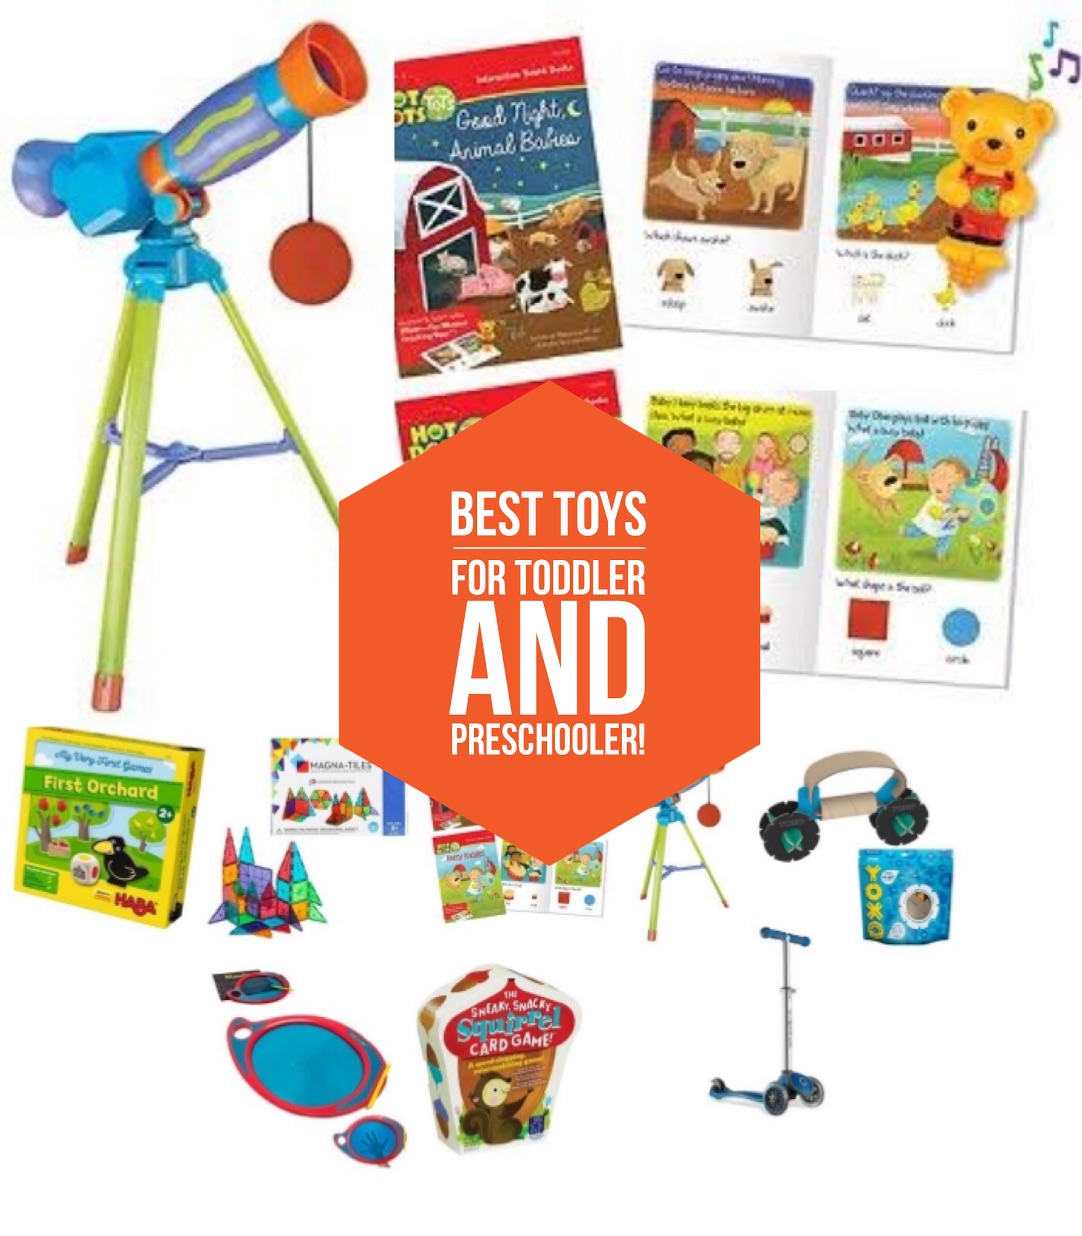 Best Toys for Toddlers and Preschoolers